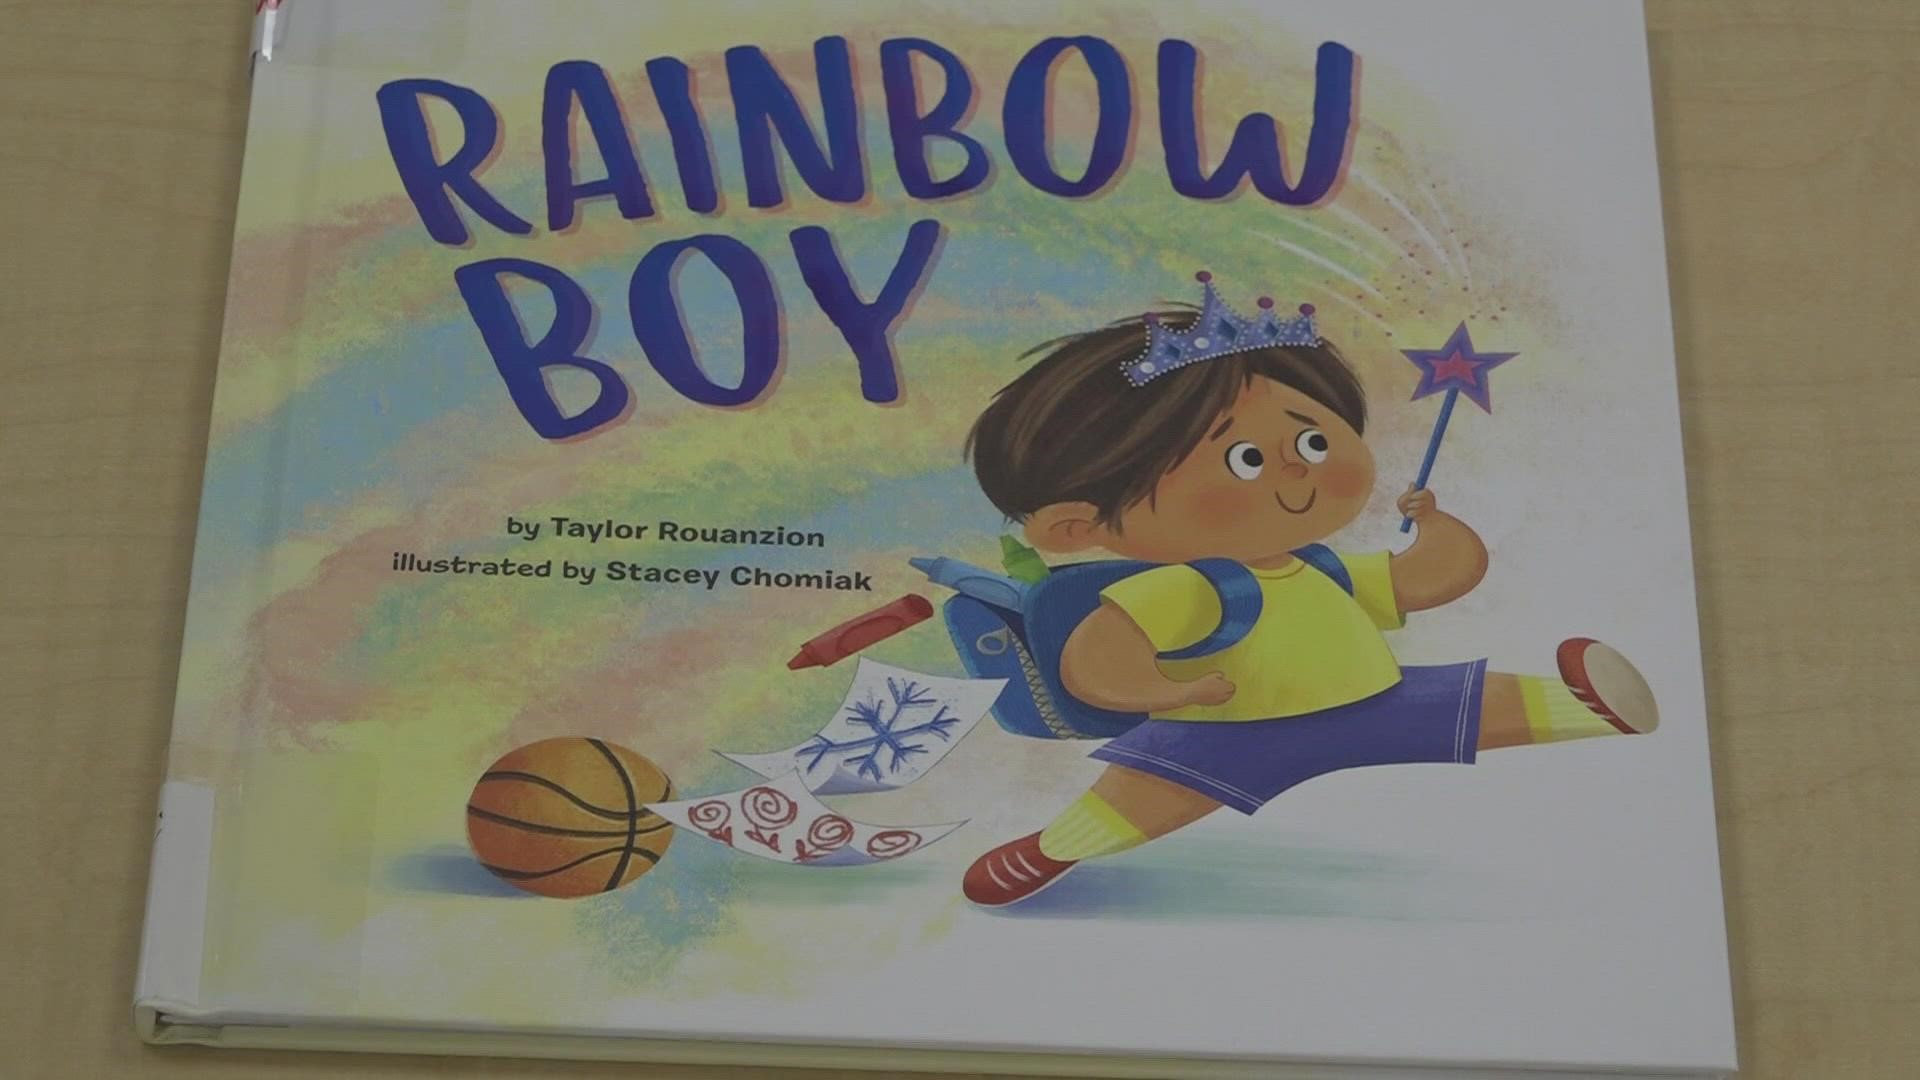 OUT Maine has purchased hundreds of books with LGBTQ+ themes to help students feel accepted and included at school.